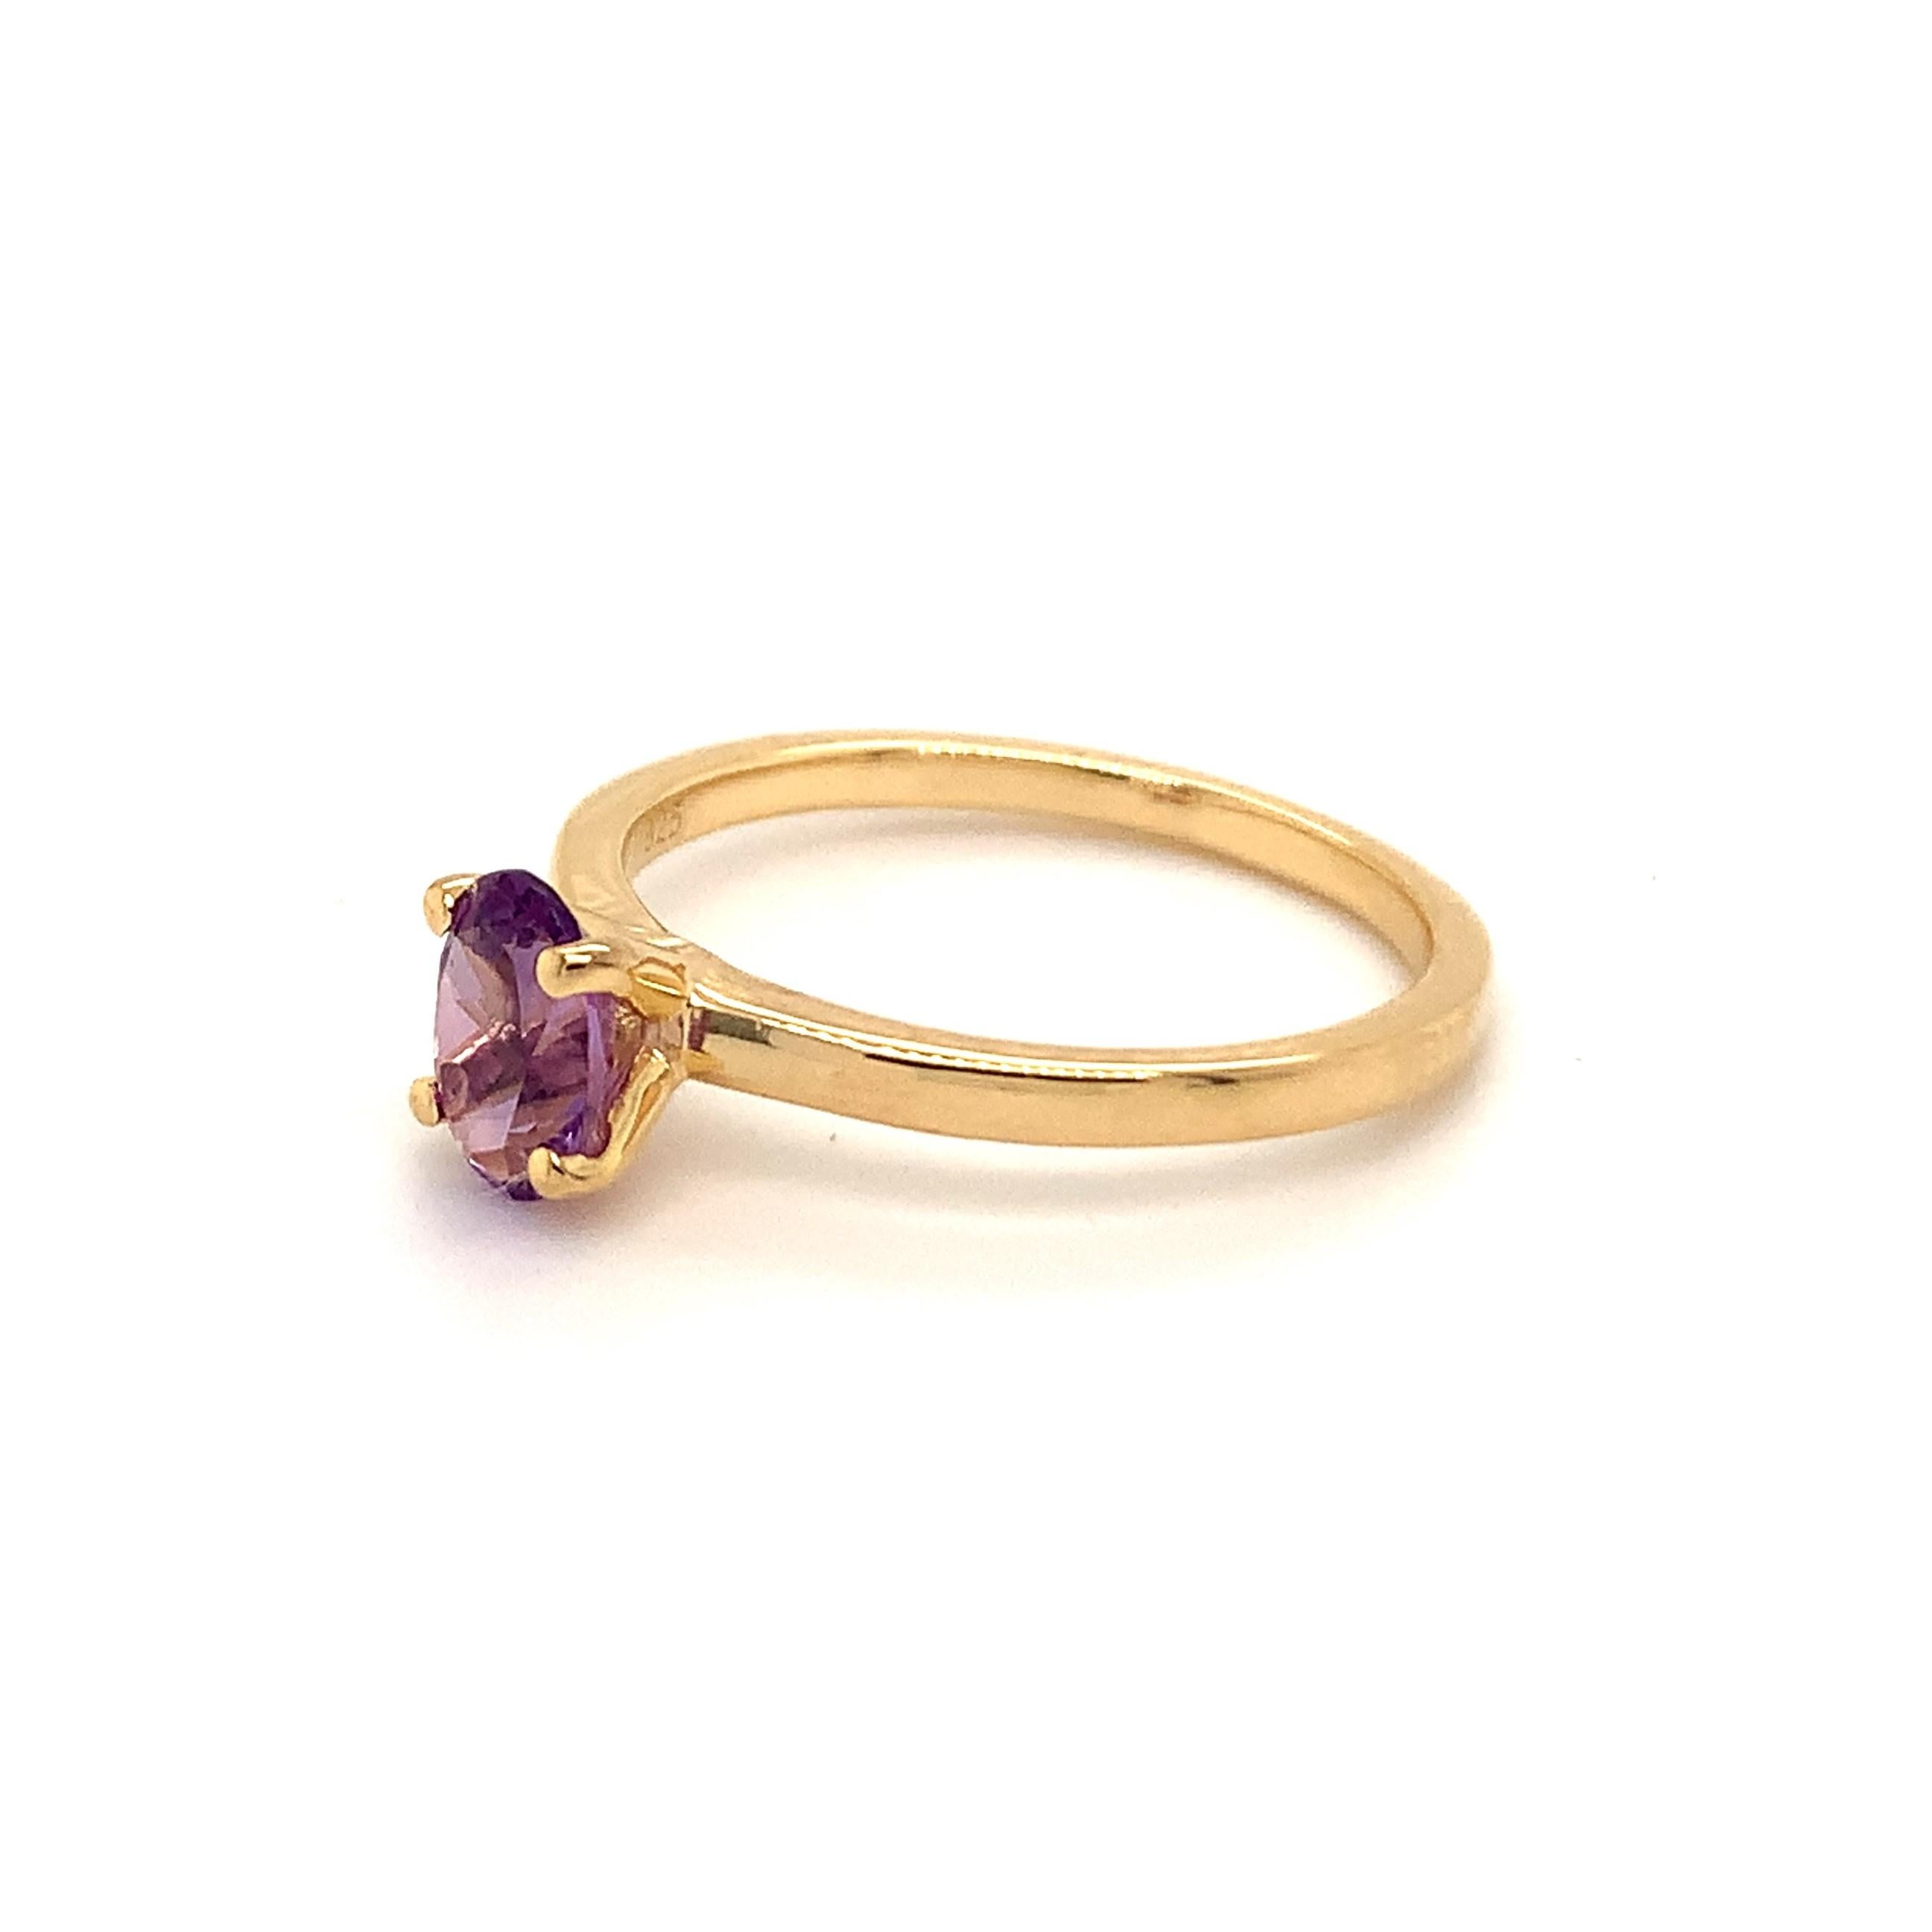 Oval Shape Amethyst Gemstone beautifully crafted in a Ring. A fiery Violet Color February Birthstone. For a special occasion like Engagement or Proposal or may be as a gift for a special person.

Primary Stone Size - 7x5mm